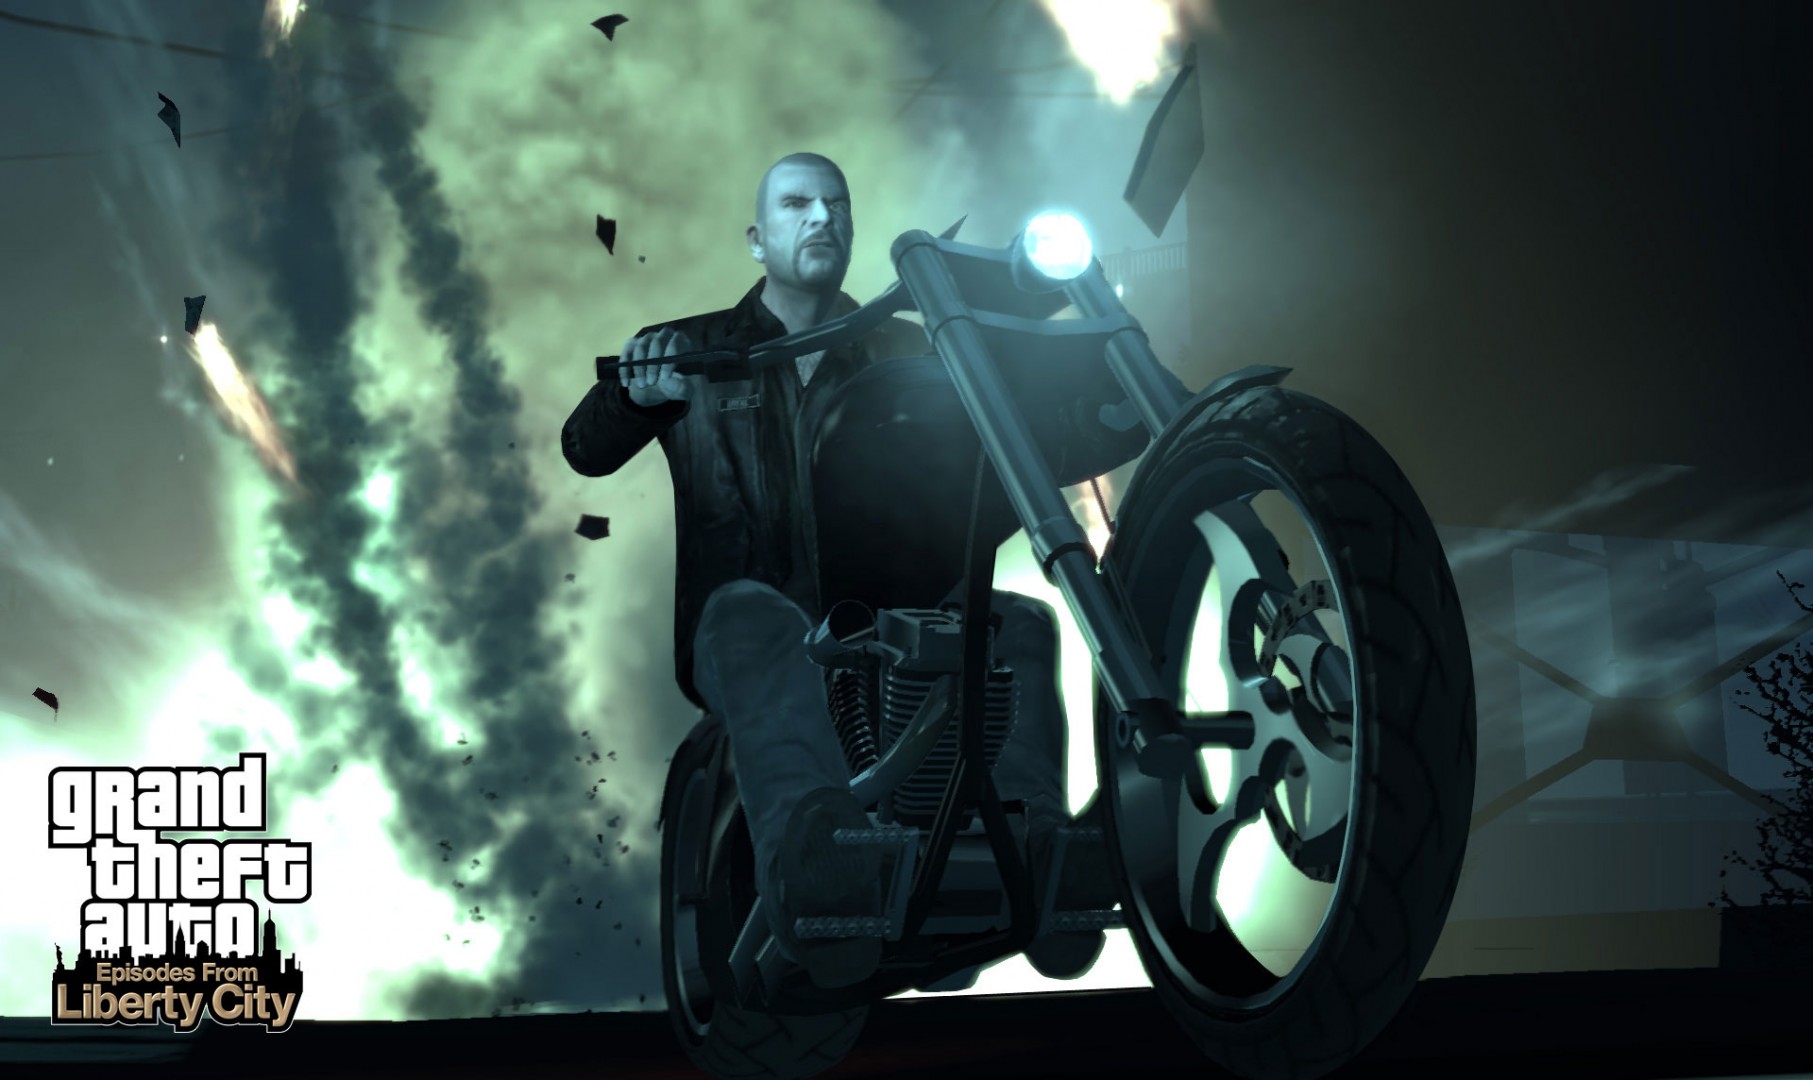 GTA IV: The Lost and Damned Screenshots (TLaD). Grand Theft Auto IV